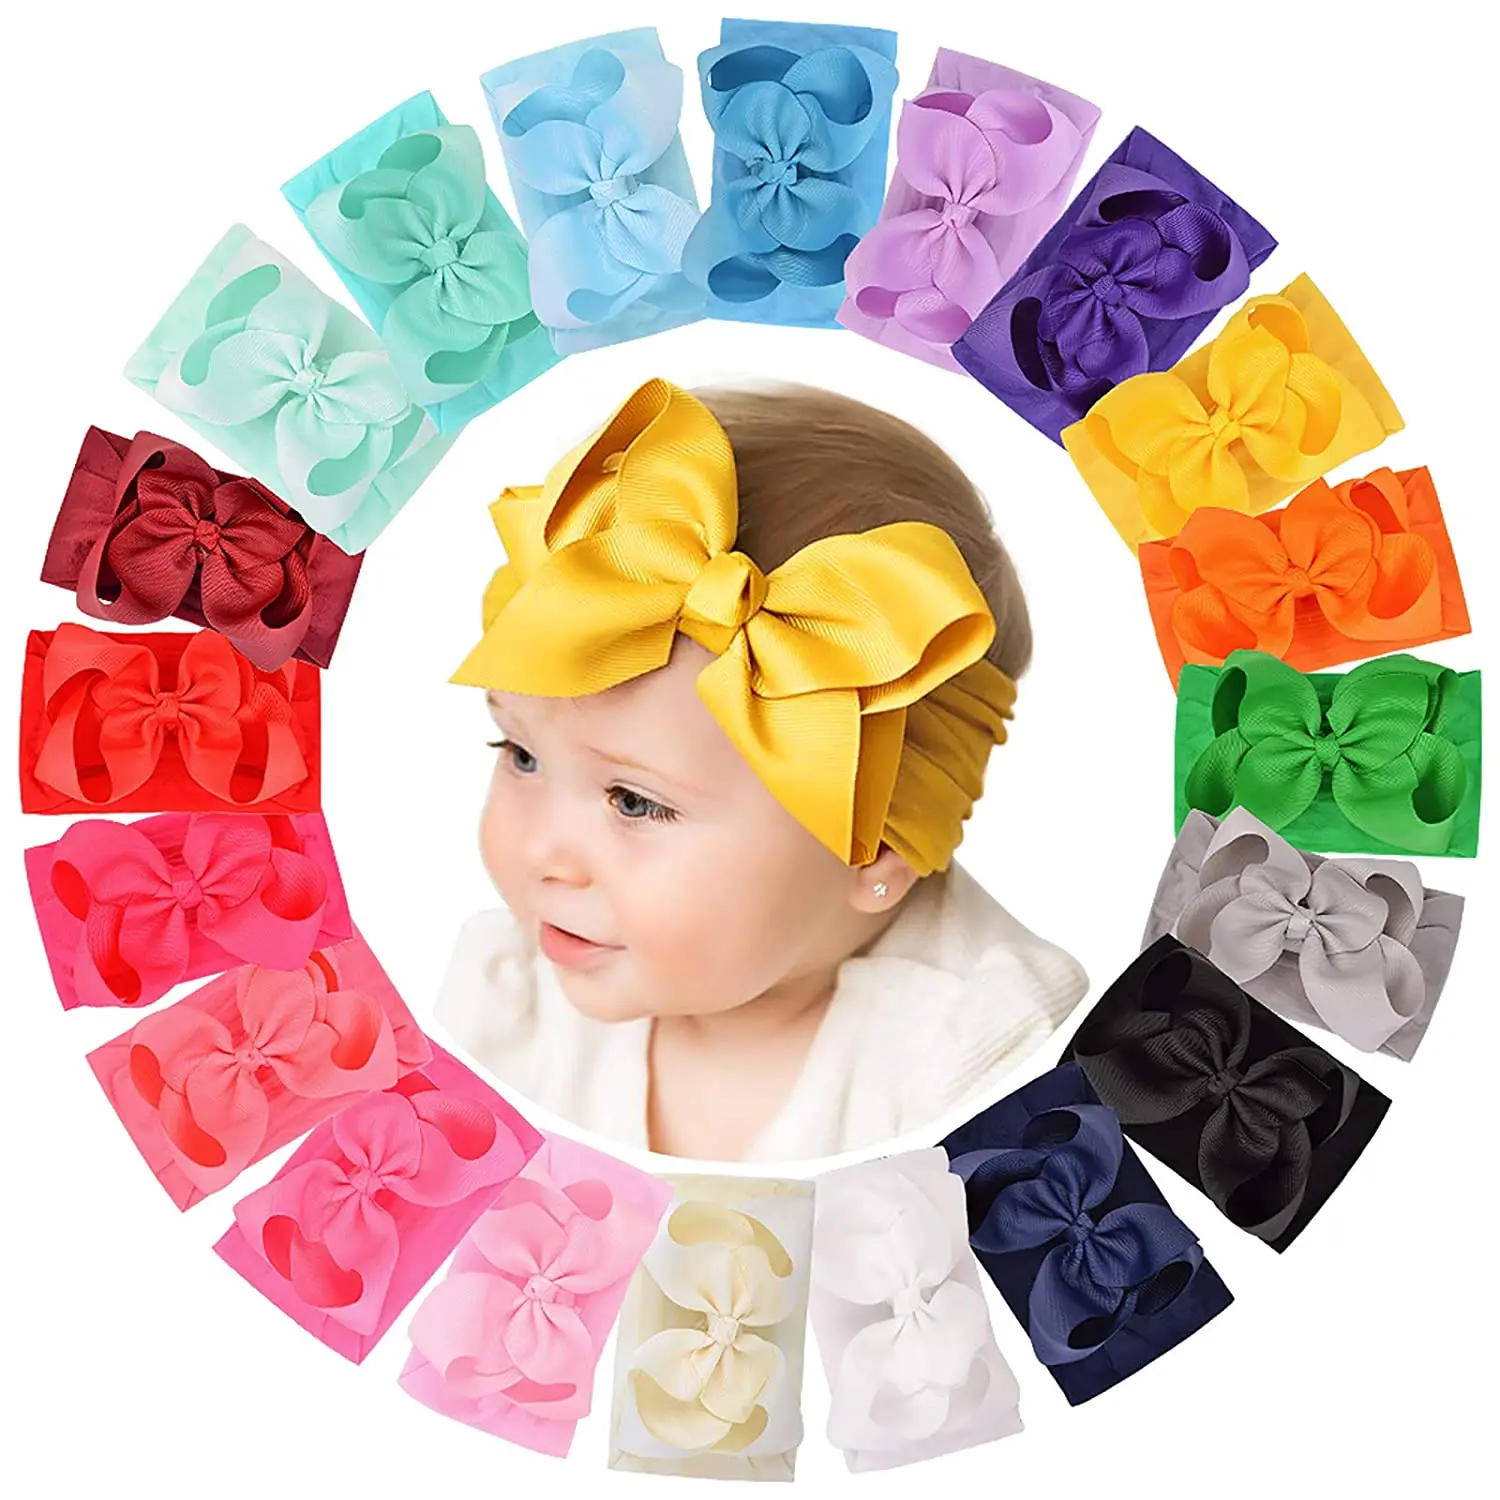 

20pcs 6 Inches Baby Girls Big Bows Headbands Elastic Nylon Hairbands Turban Hair Accessories for Newborns Infants Toddlers Kids